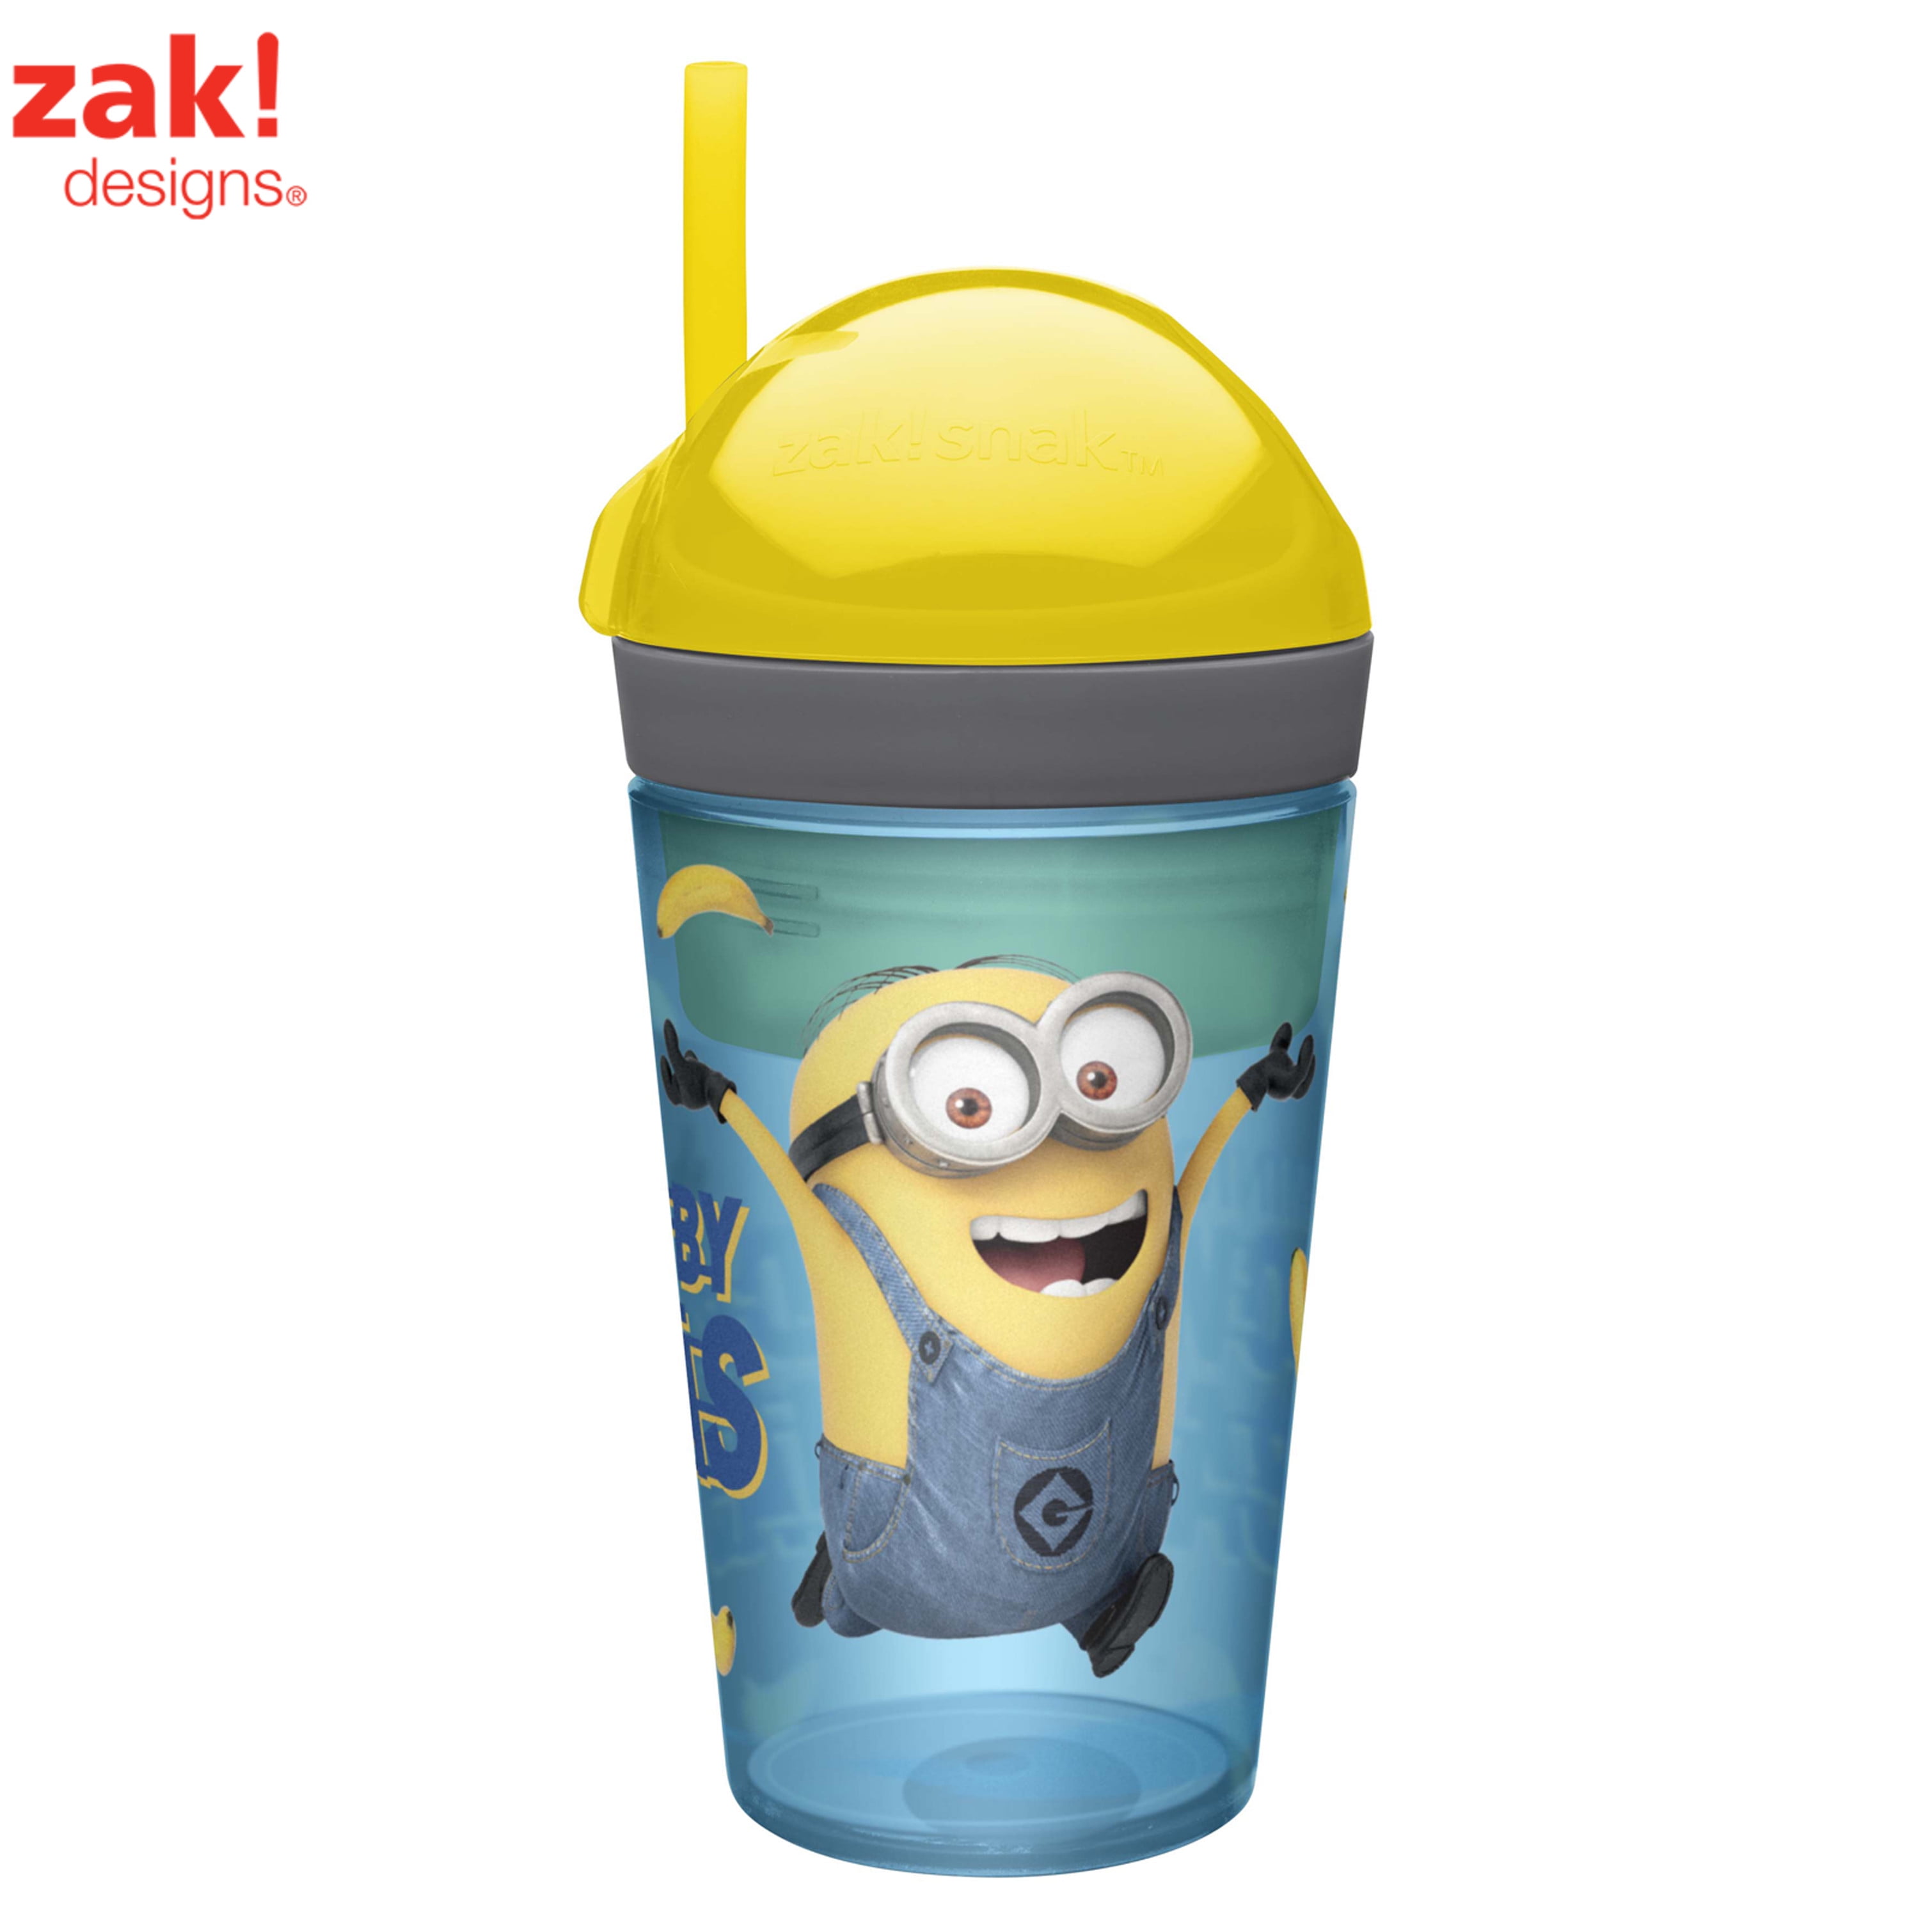 Zak LUNCH DINNER MEAL TIME SETS Minions Character Eating Drinking Containers 